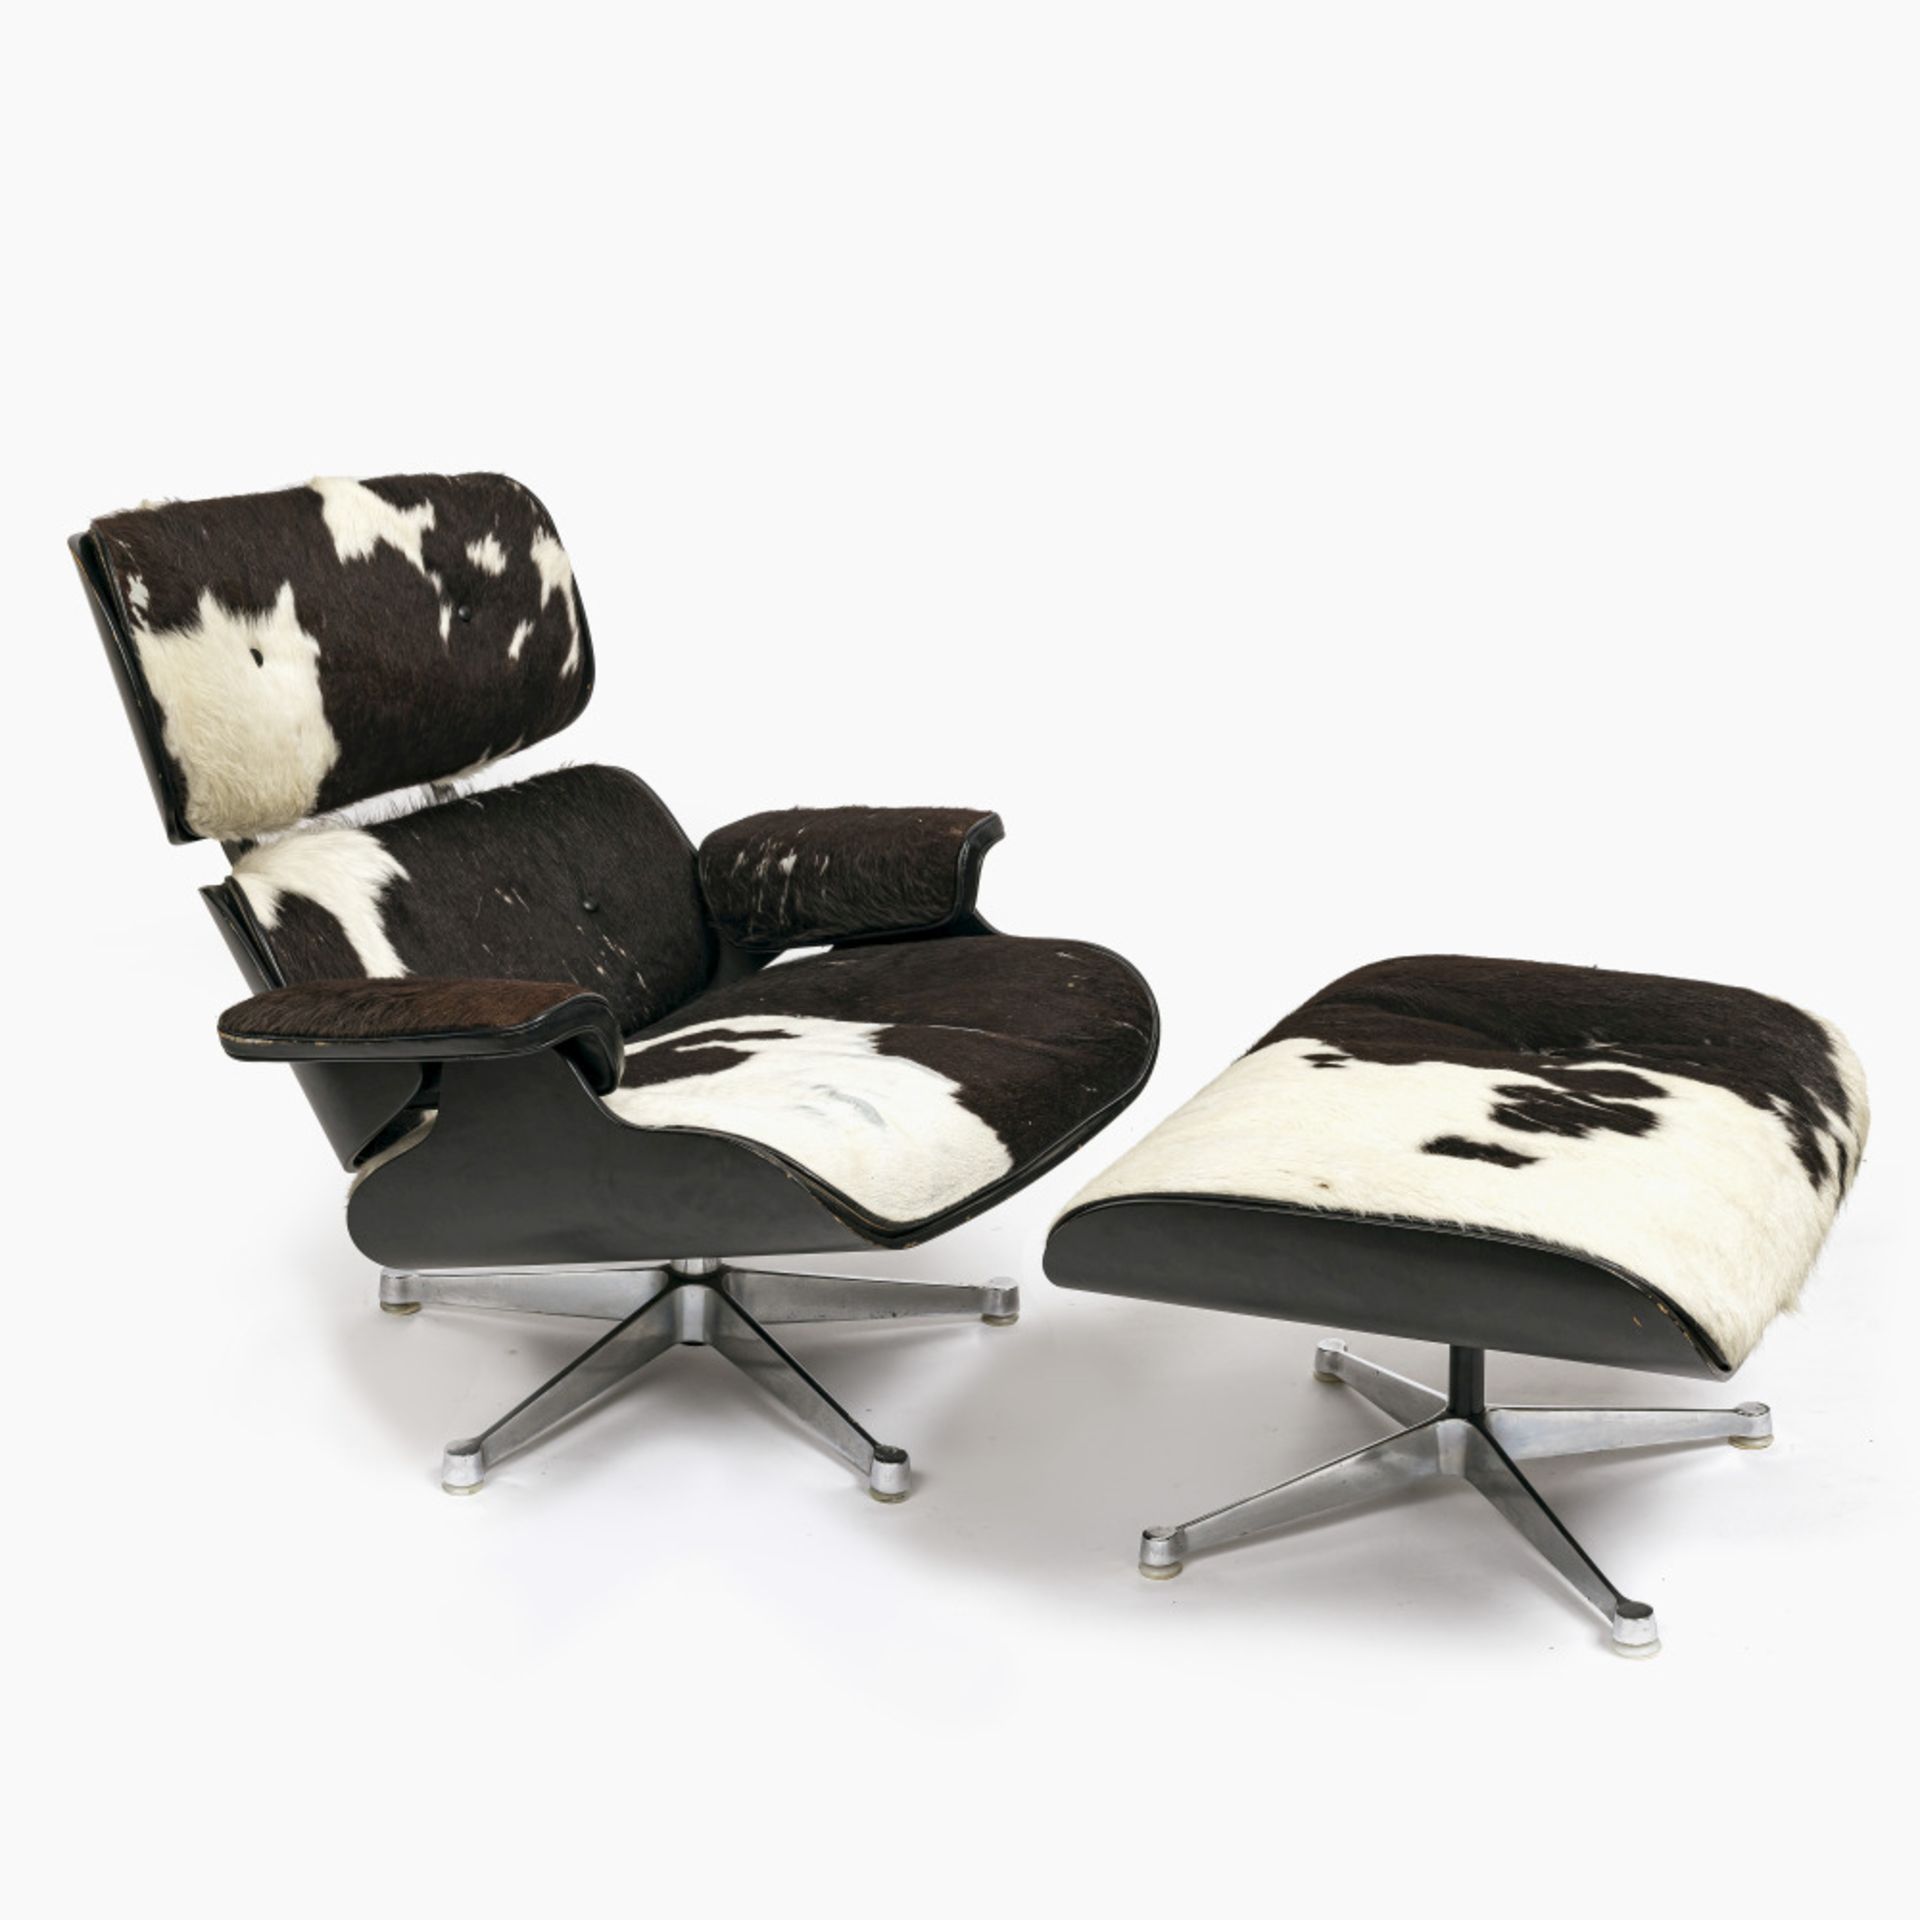 A lounge chair mit ottoman - Design by Ray and Charles Eames for Vitra